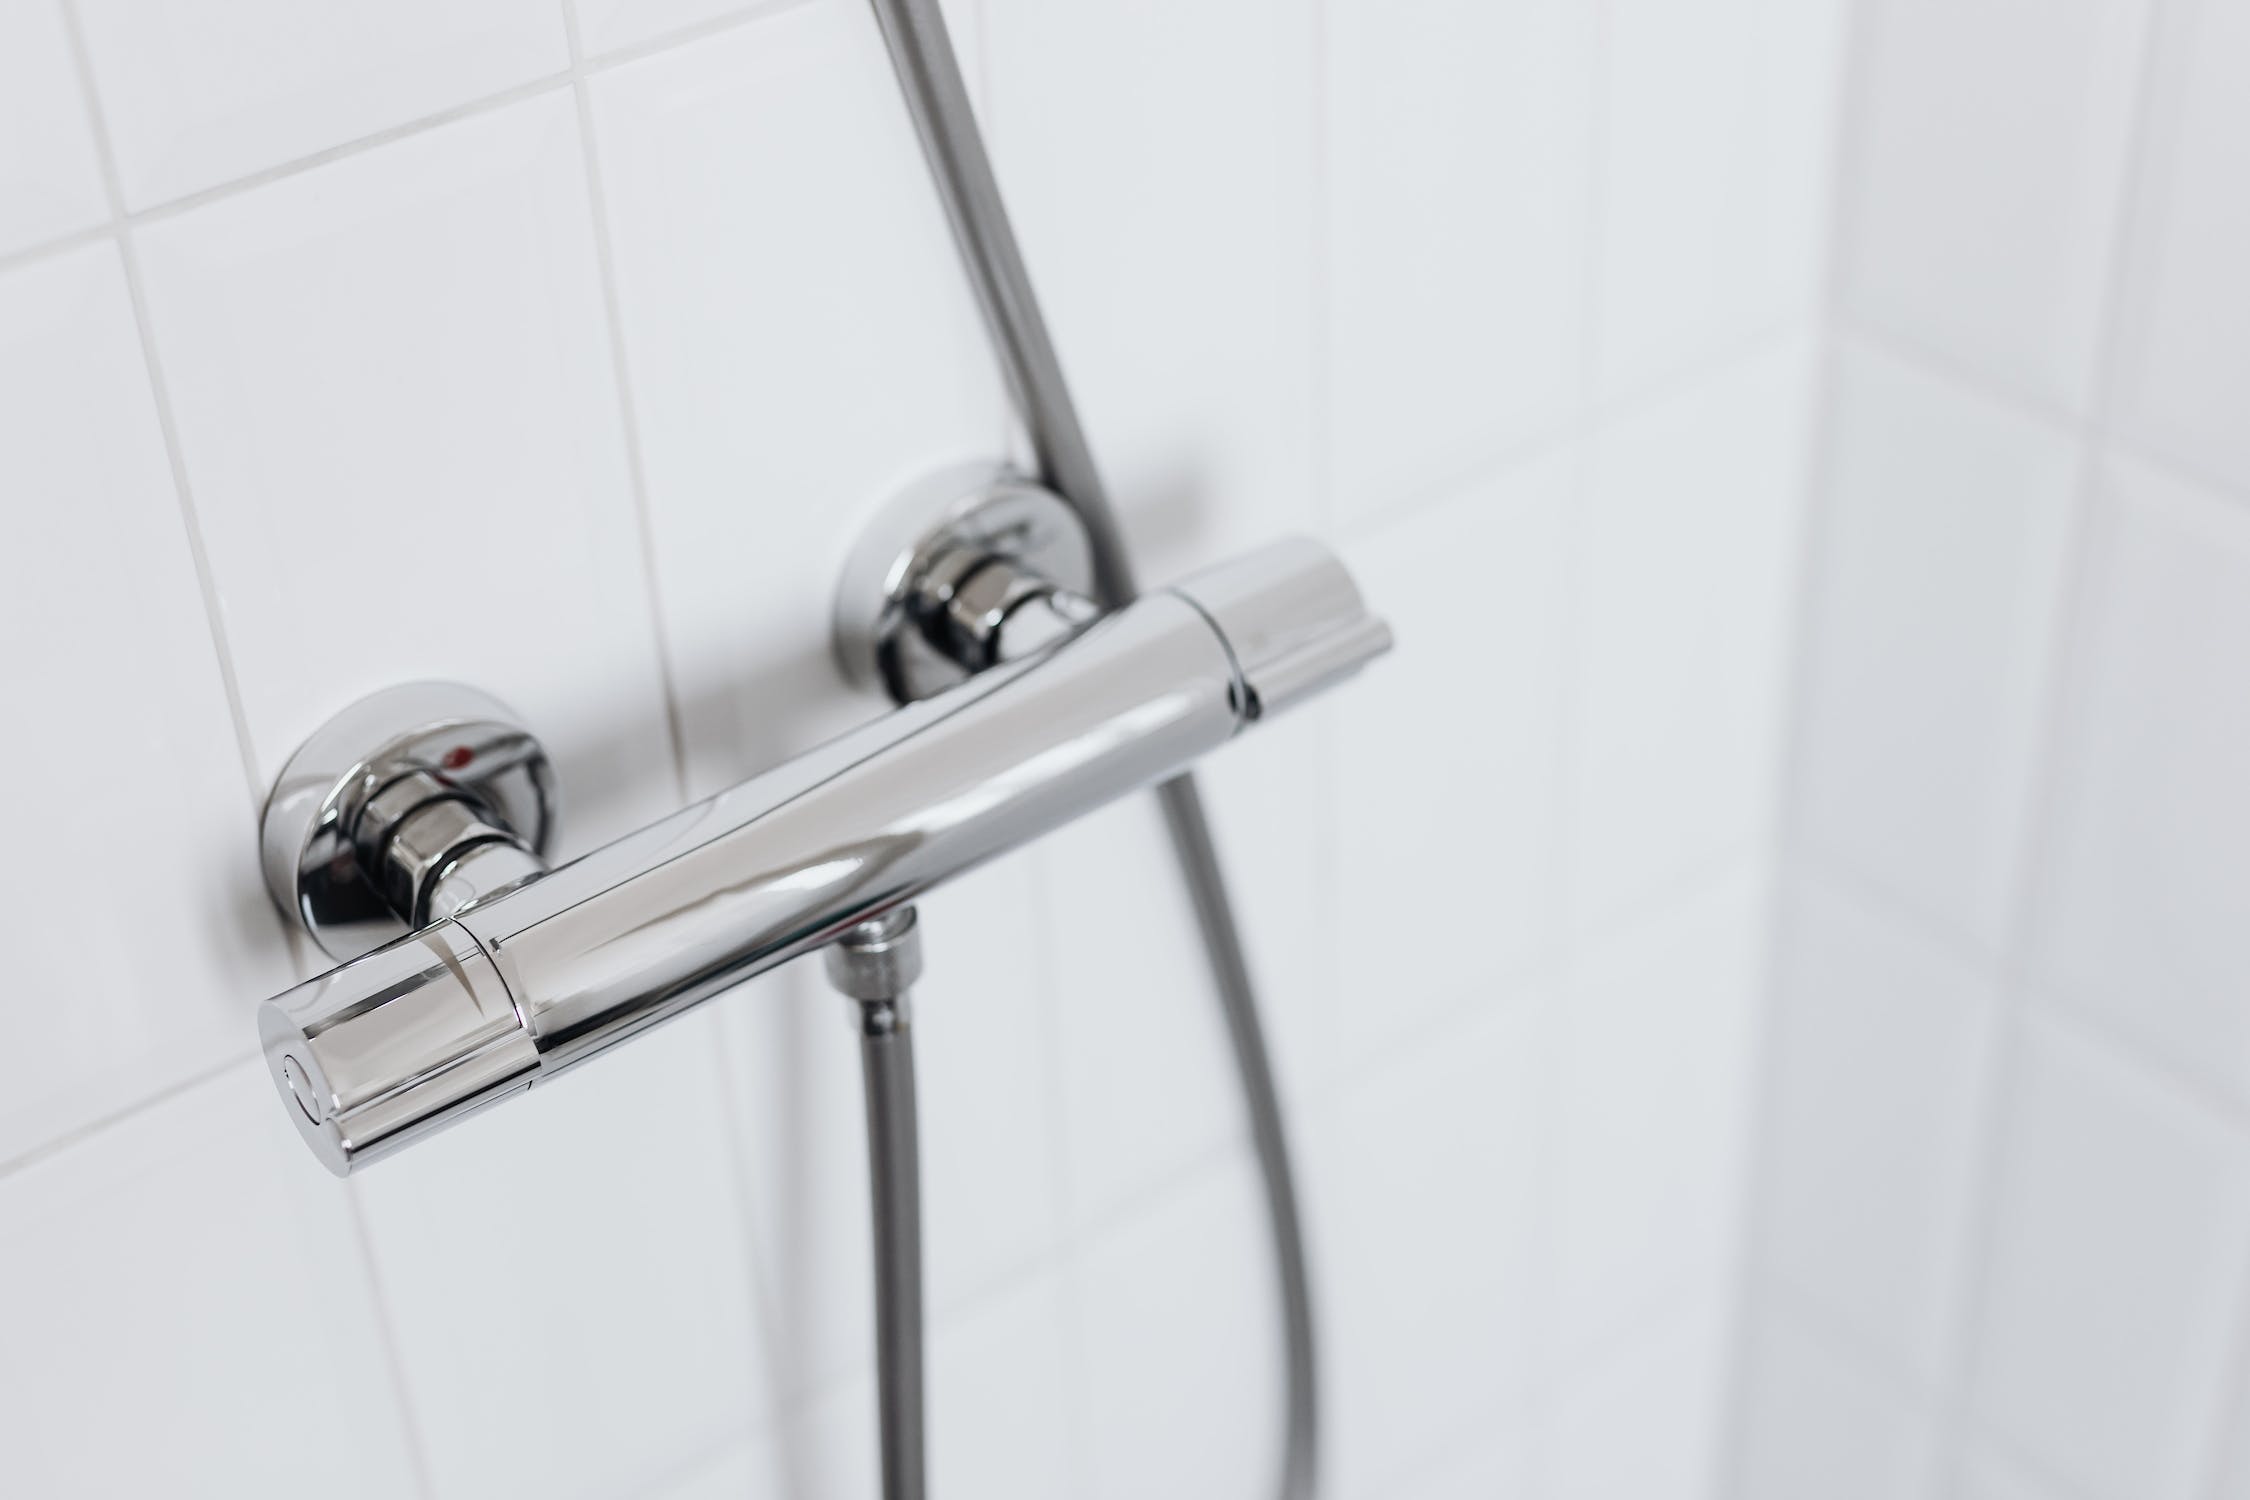 Frequently Asked Questions about Plumbing Installation in Barnegat, NJ